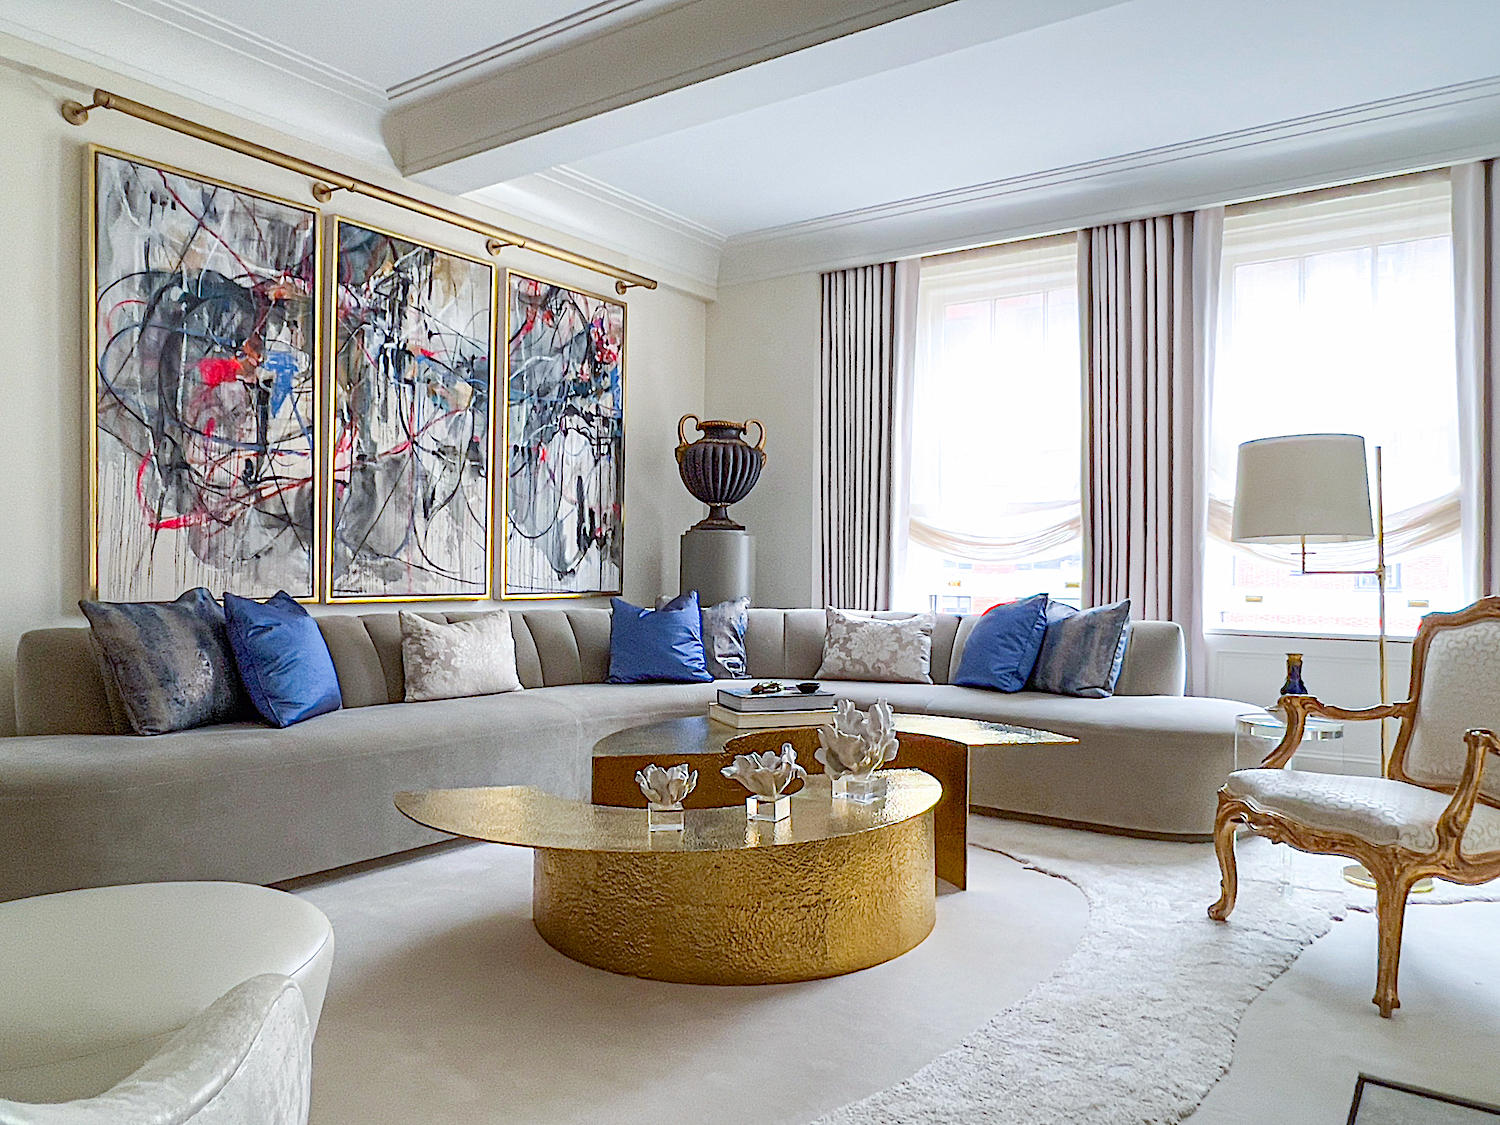 At Home with Caleb Anderson and DeAndre DeVane in their Elegant Manhattan Apartment